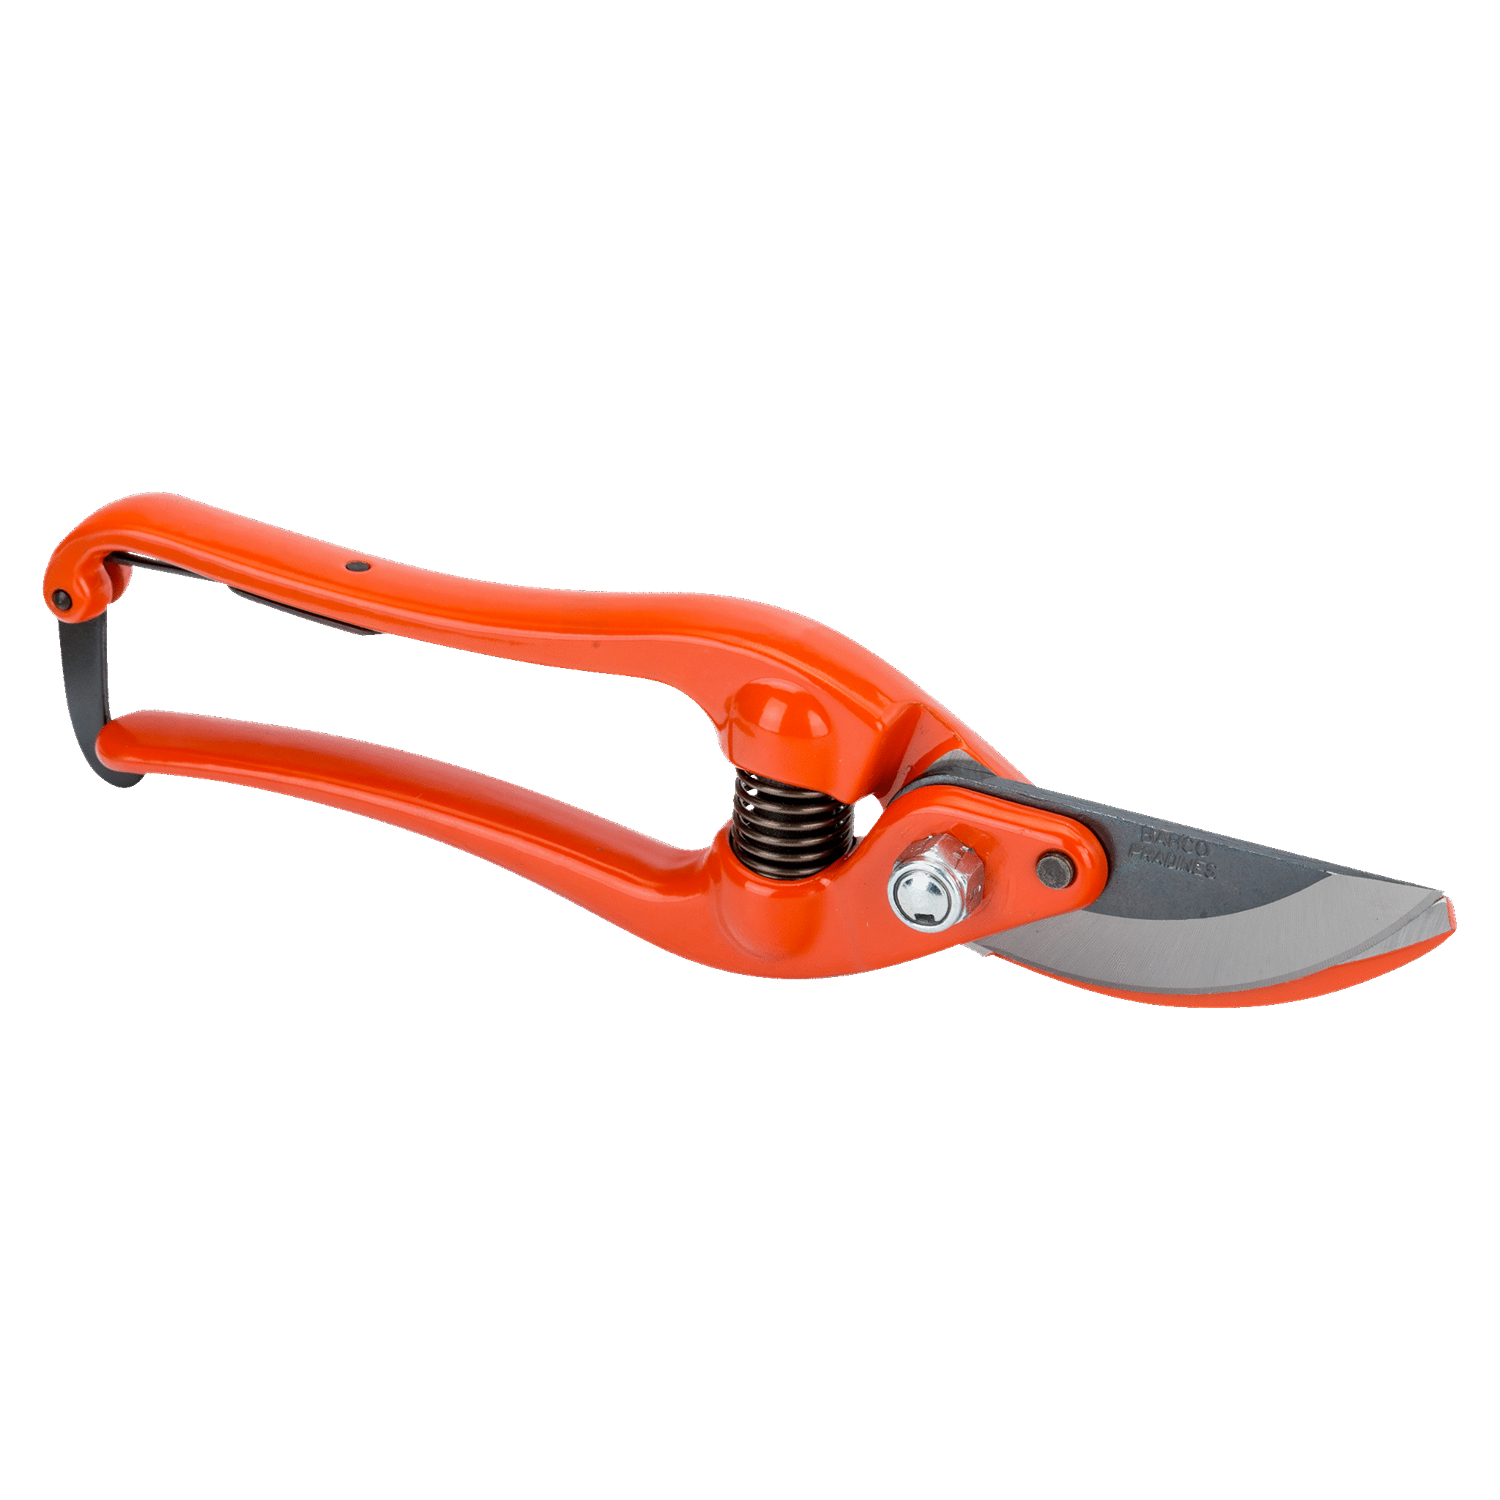 BAHCO P3-20-F/P3-23-F Bypass Secateurs with Forged Steel Handle - Premium Secateurs from BAHCO - Shop now at Yew Aik.